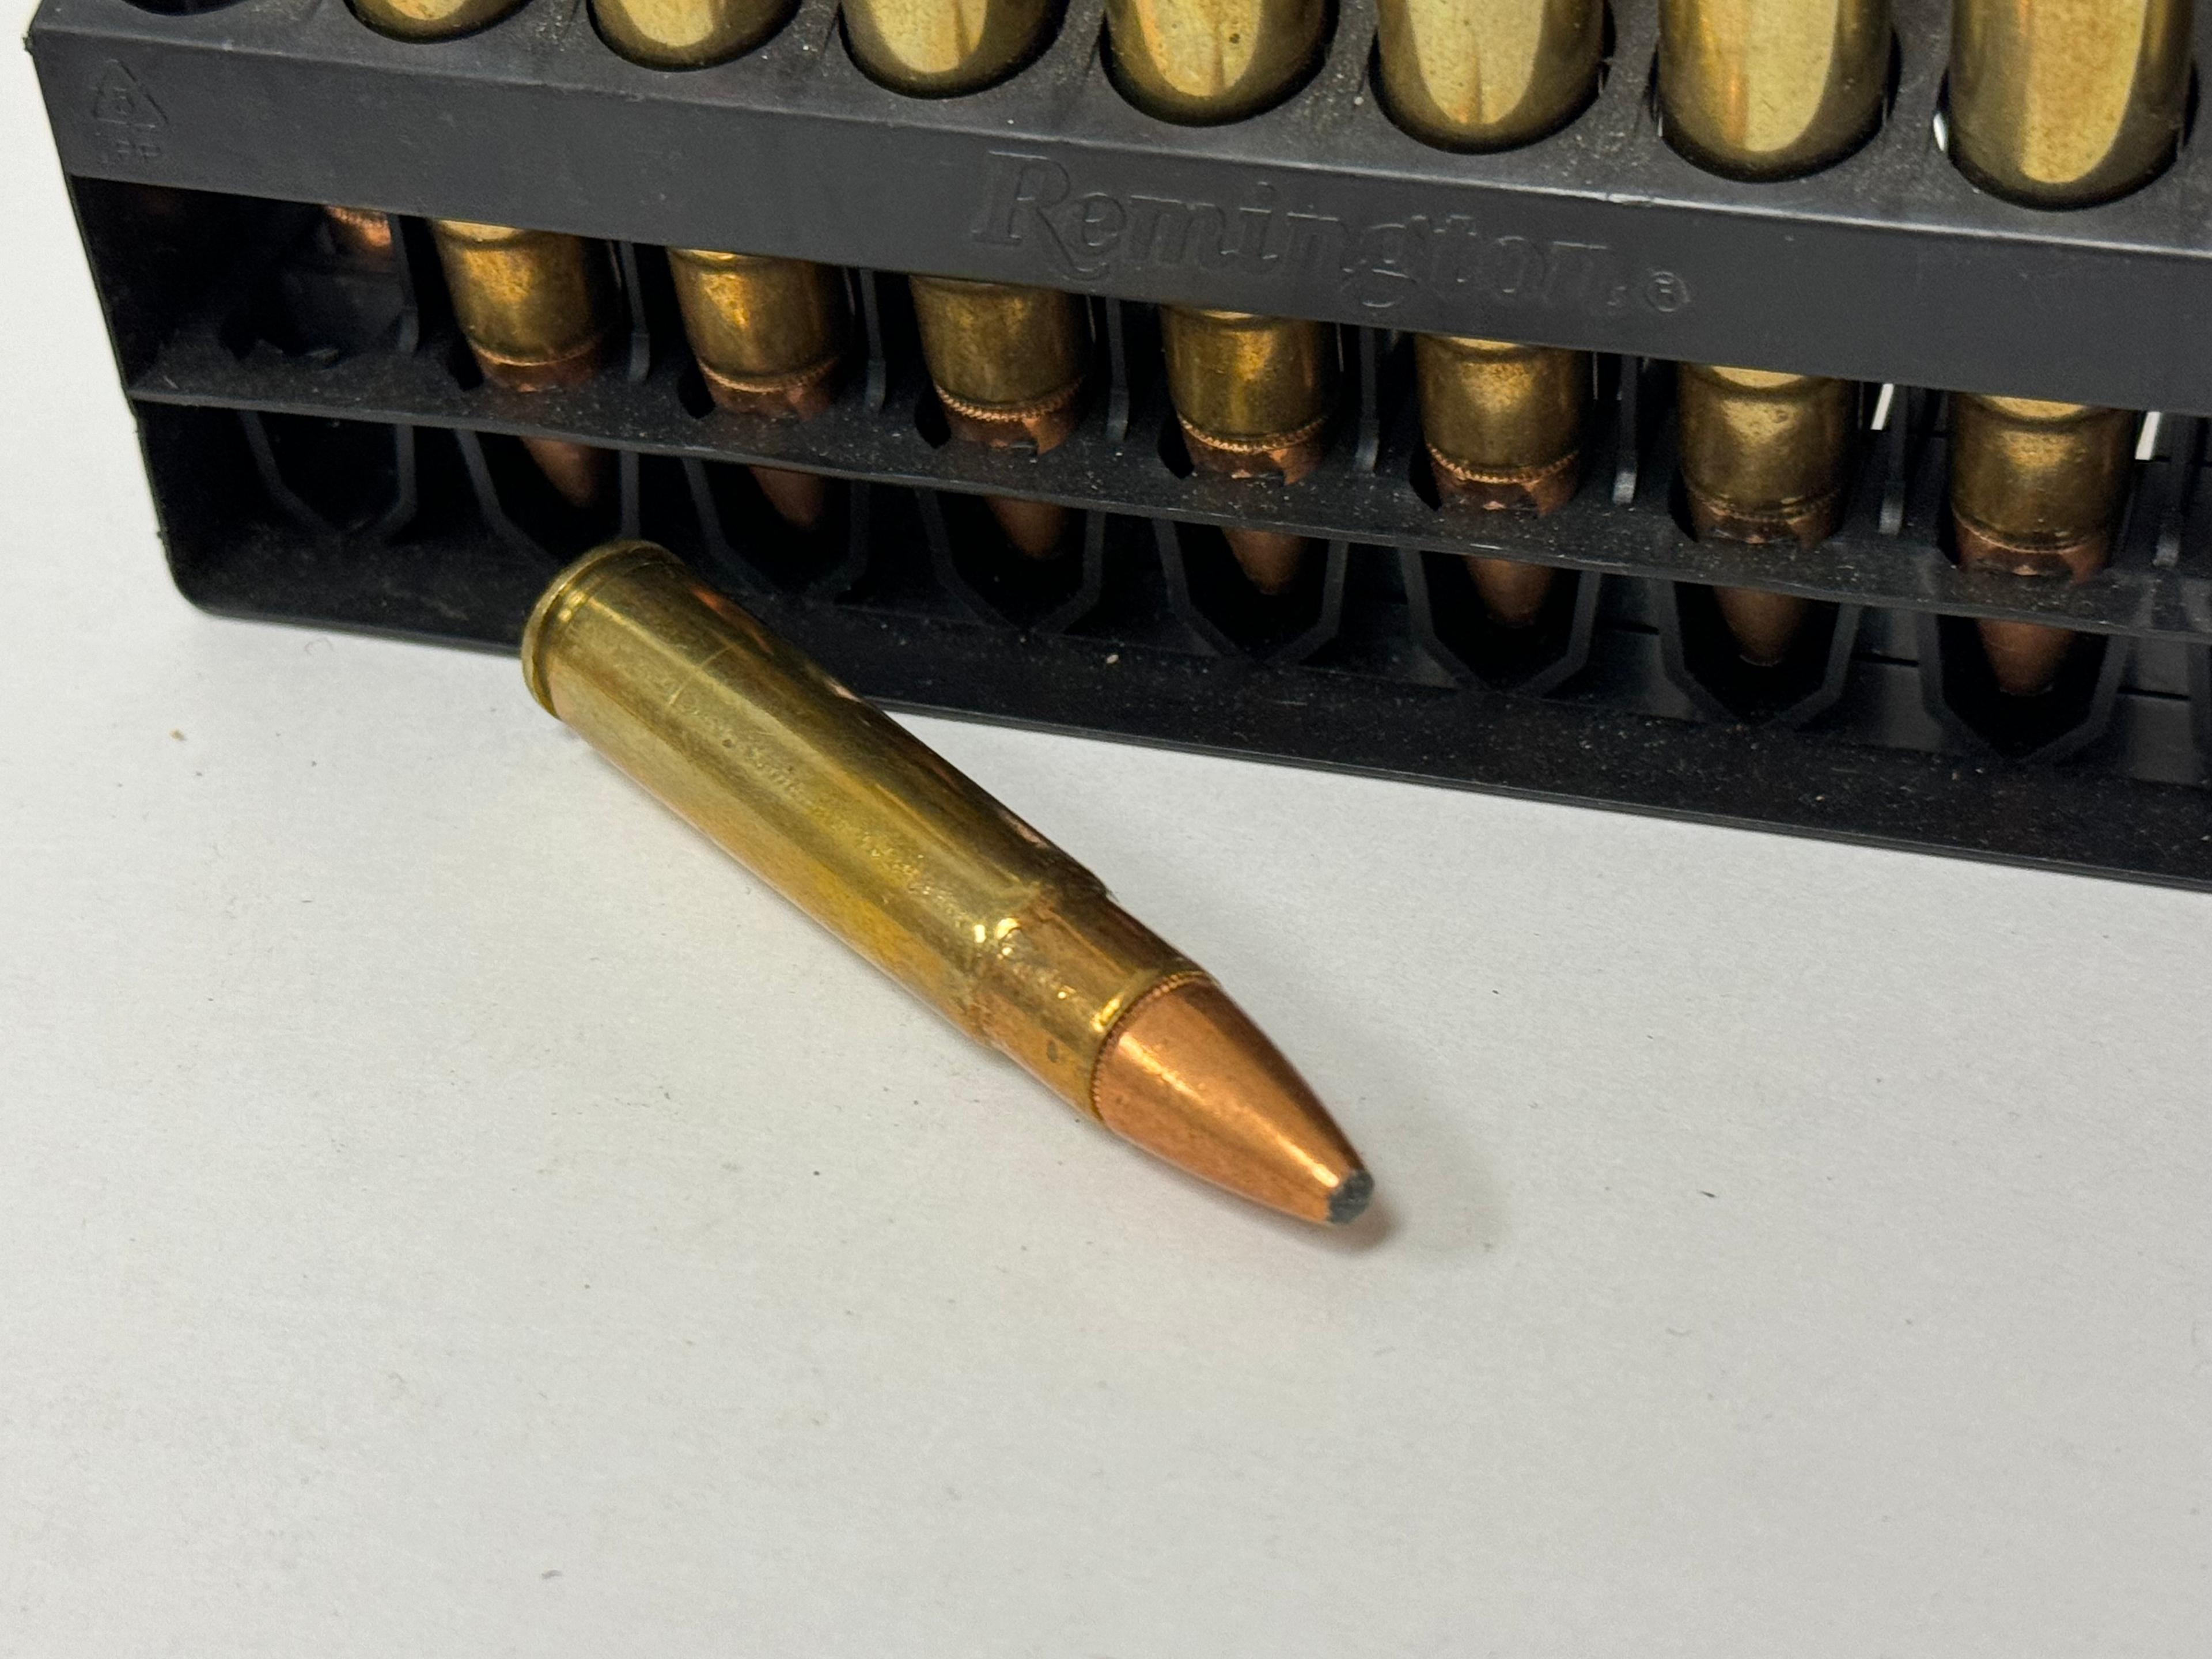 25rds. Of .35 REMINGTON Factory Ammunition and (48) Shot Brass 